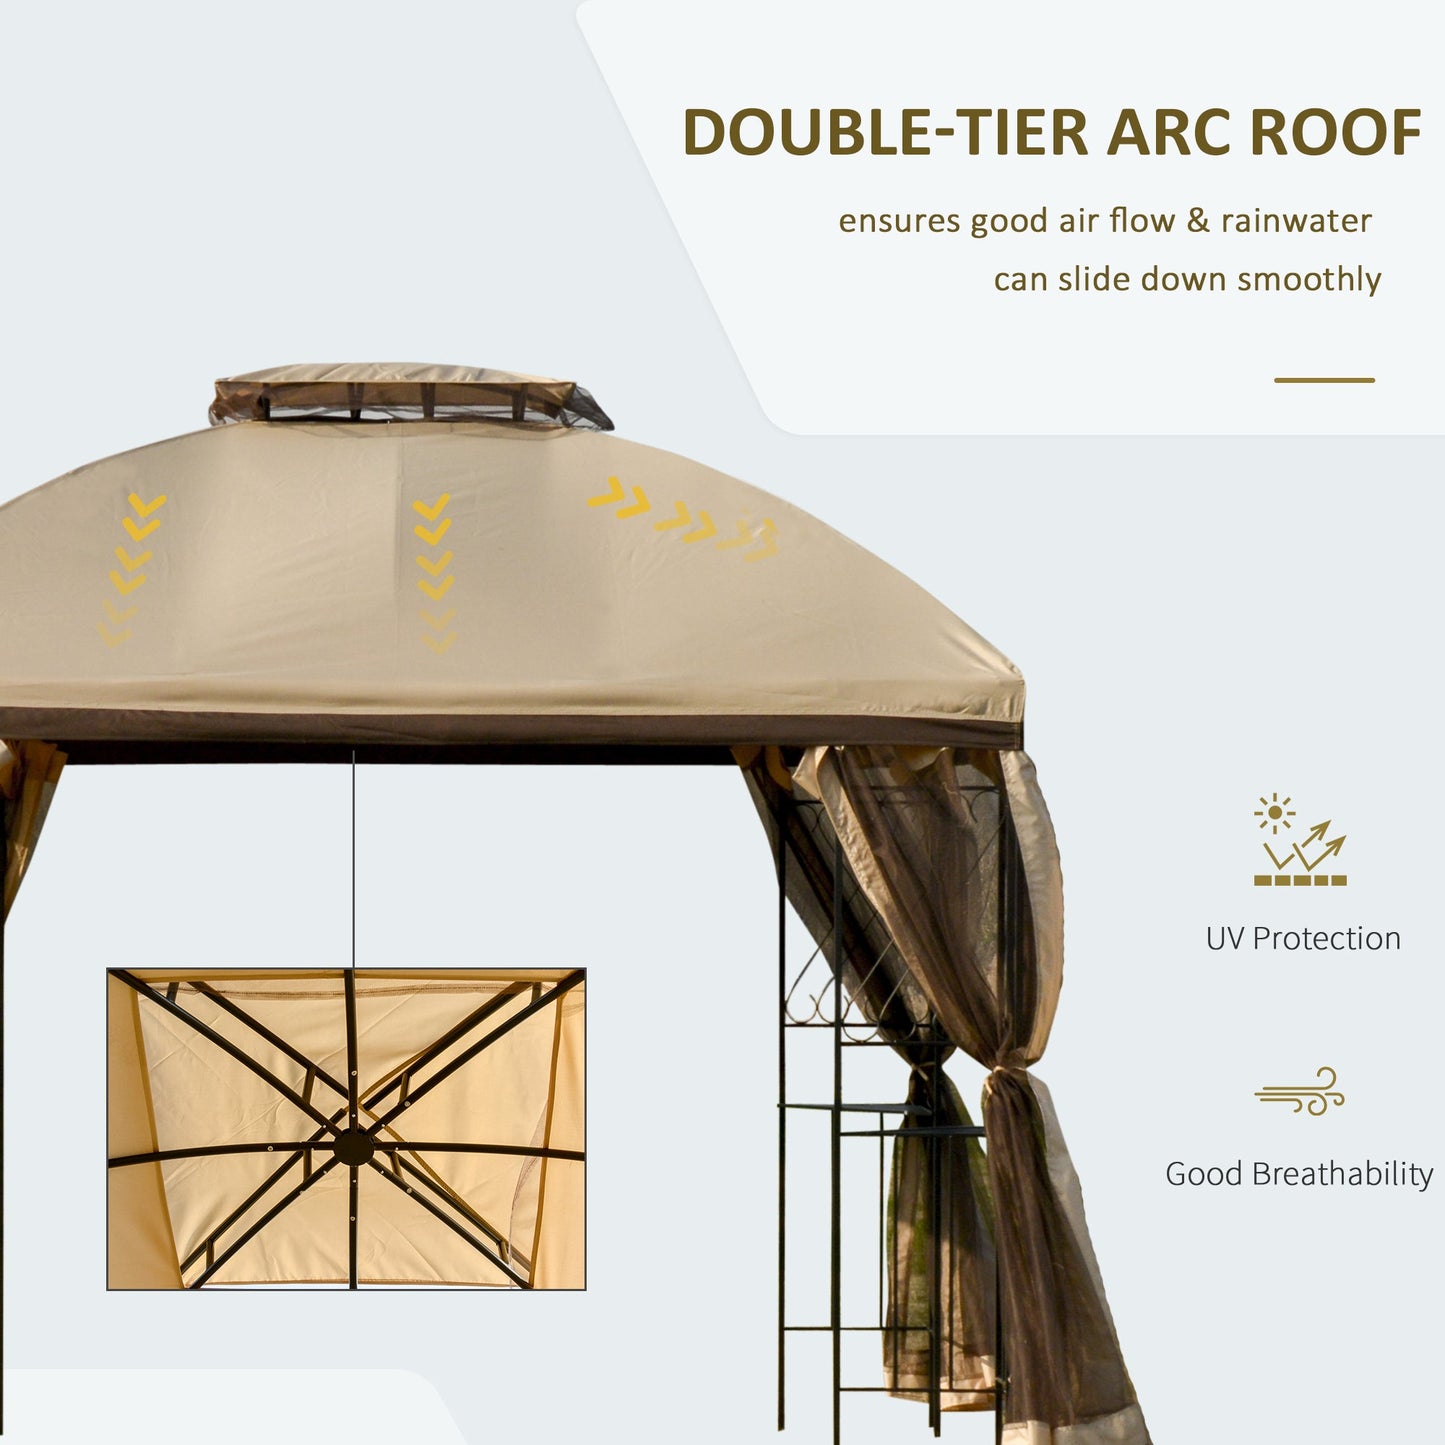 Outdoor and Garden-10' x 10' Patio Gazebo Canopy Outdoor Canopy Shelter with Double Tier Roof, Removable Mesh Netting, Display Shelves, Beige - Outdoor Style Company